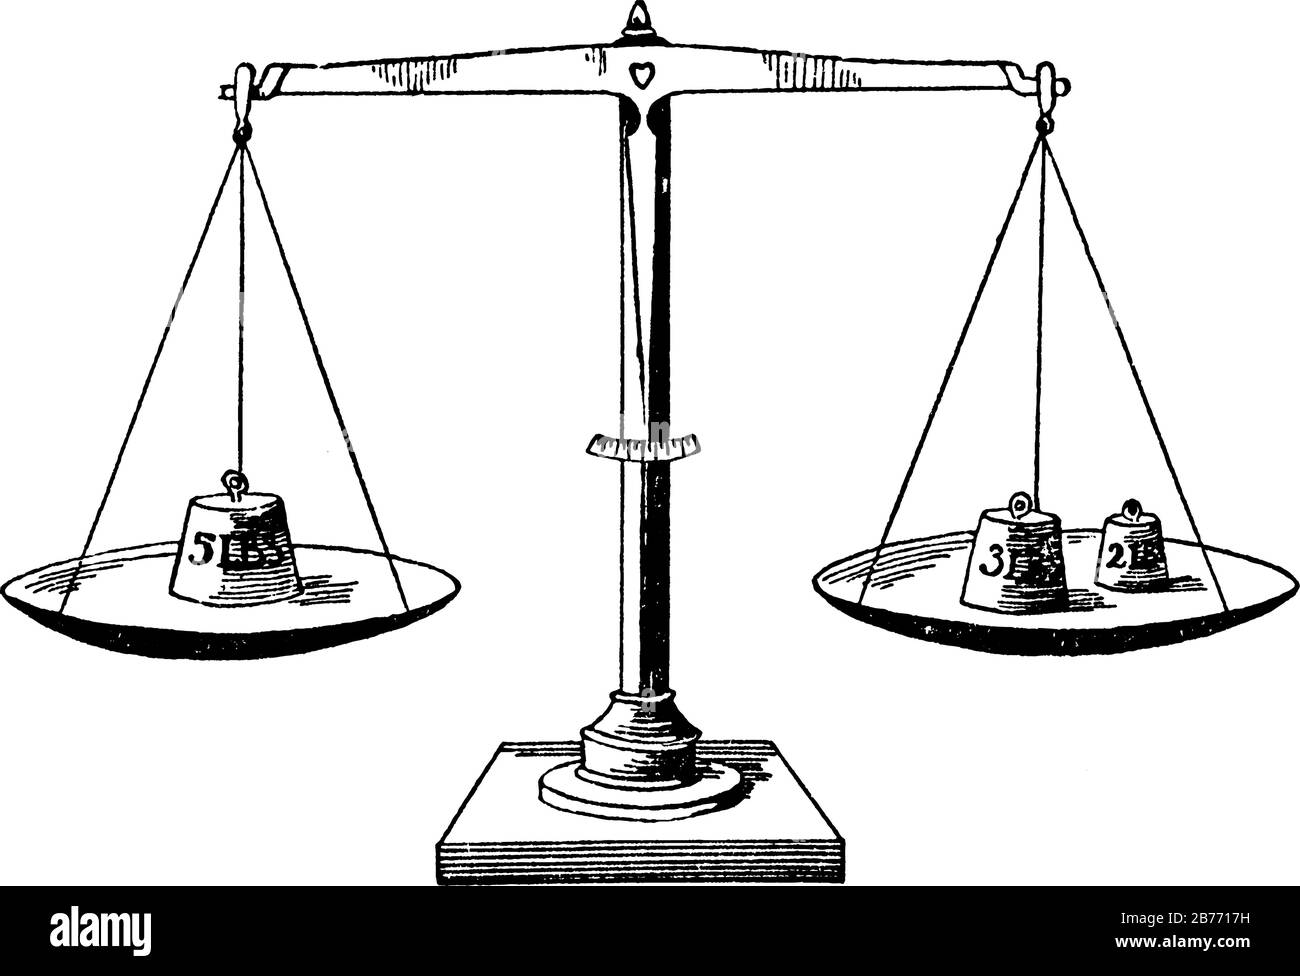 https://c8.alamy.com/comp/2B7717H/a-typical-representation-of-a-balance-scale-holding-5-pounds-on-the-left-and-3-and-2-pound-weights-on-the-right-showing-32=5-vintage-line-drawing-o-2B7717H.jpg